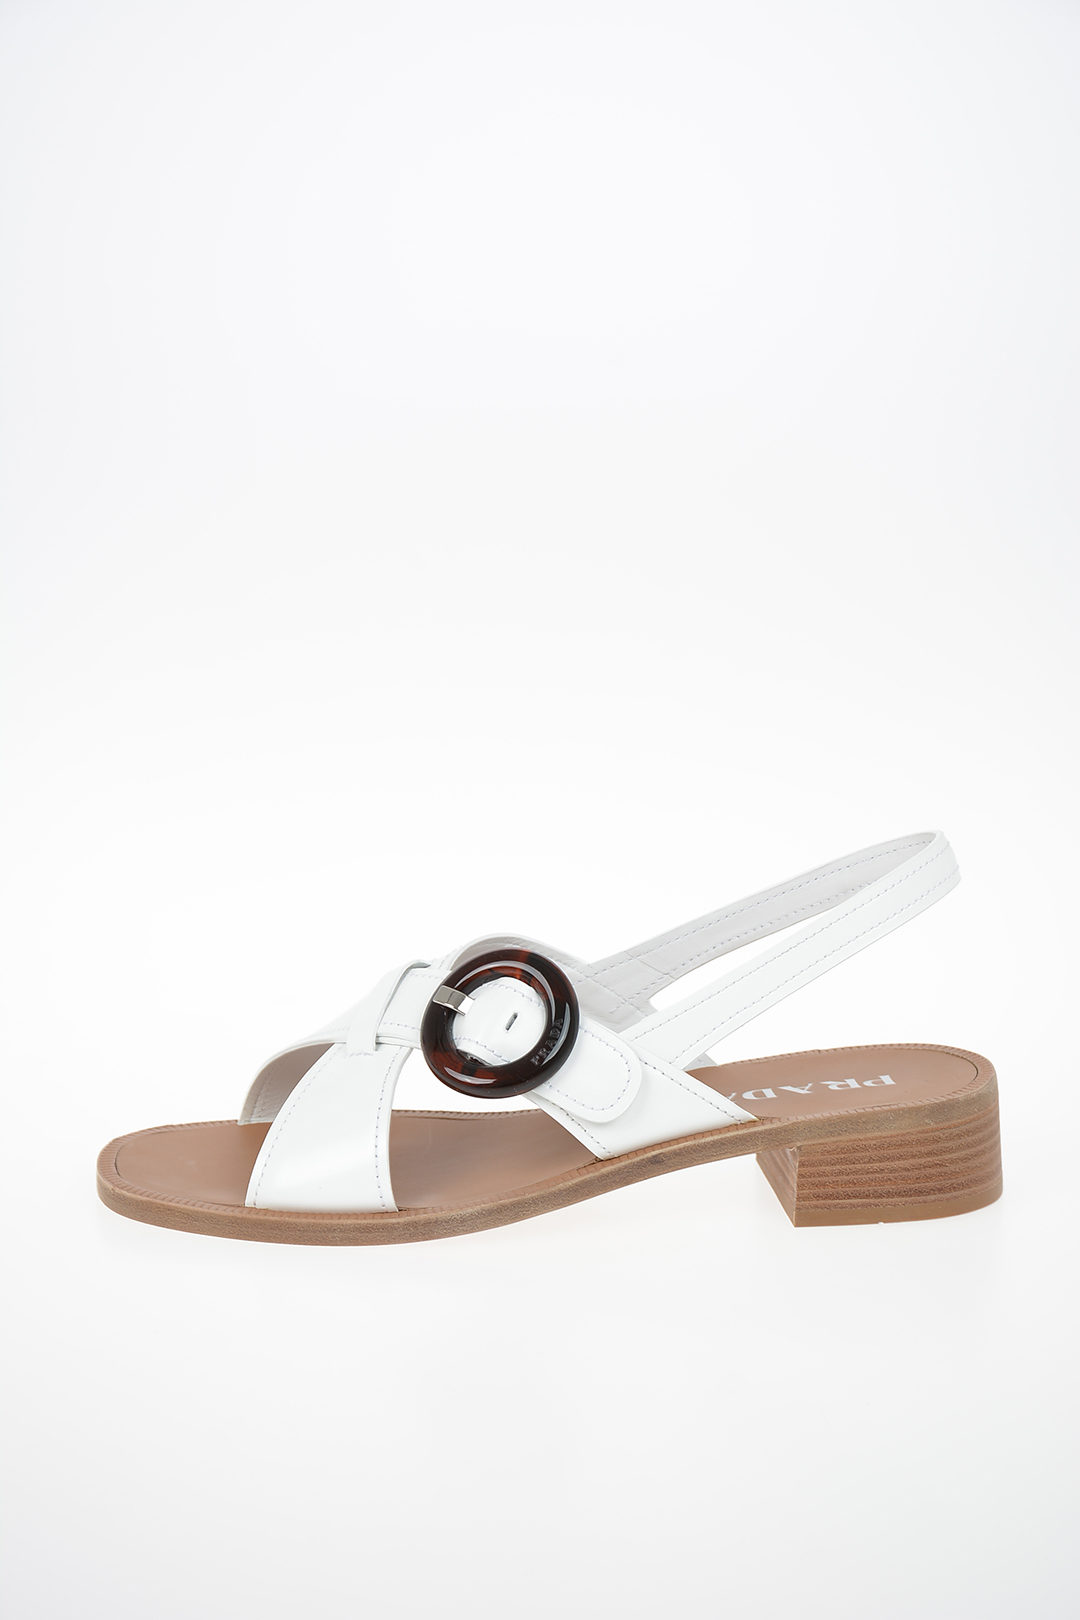 Prada Leather Sandals with Buckle women - Glamood Outlet